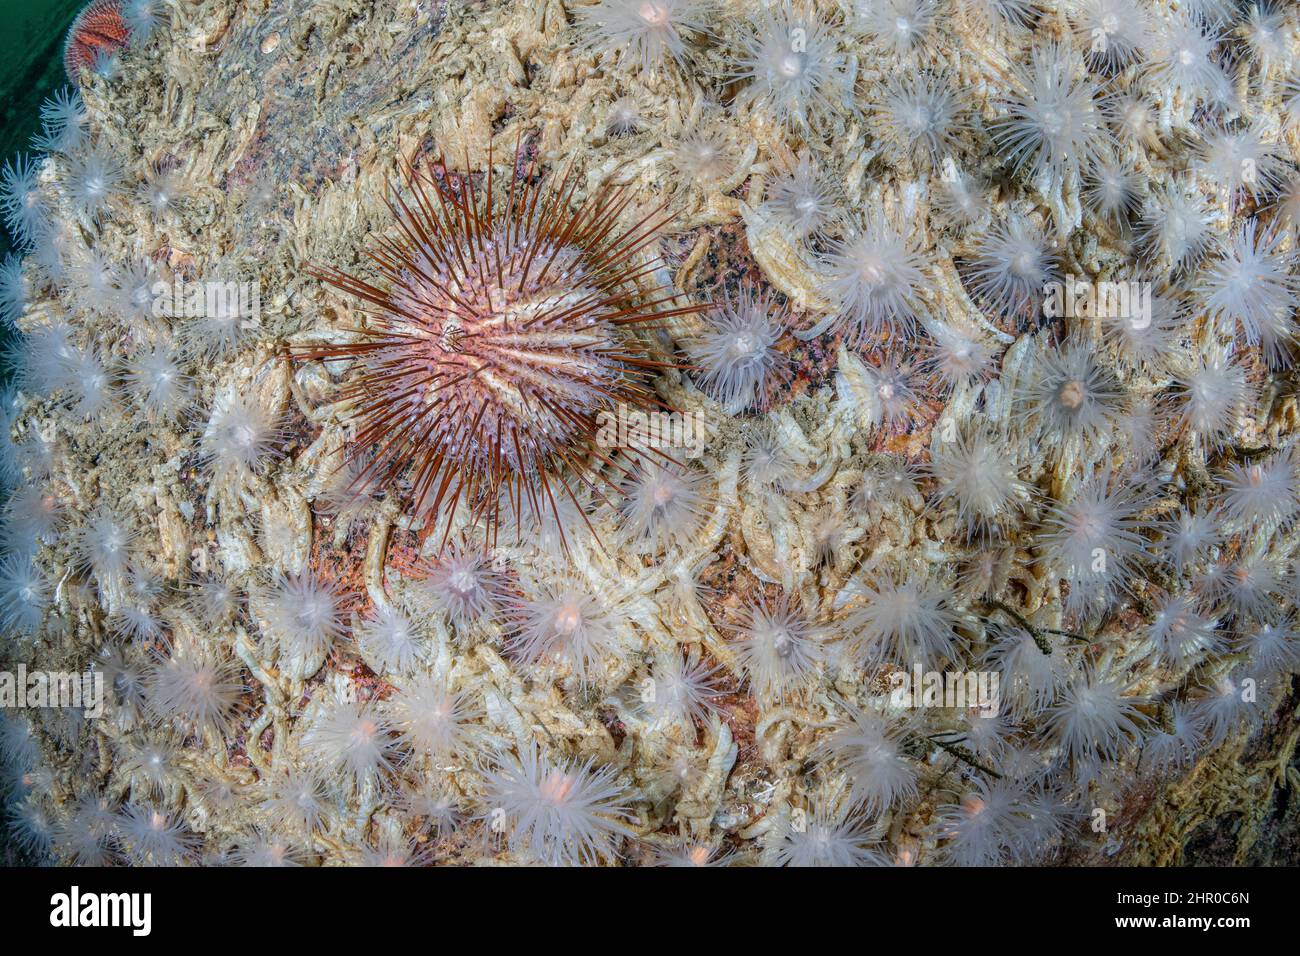 Sea urchin (Echinus acutus) on a wall of of sea anemone (Protanthea simplex). Flatanger, coastal commune in central Norway, north of the Trondheimfjor Stock Photo